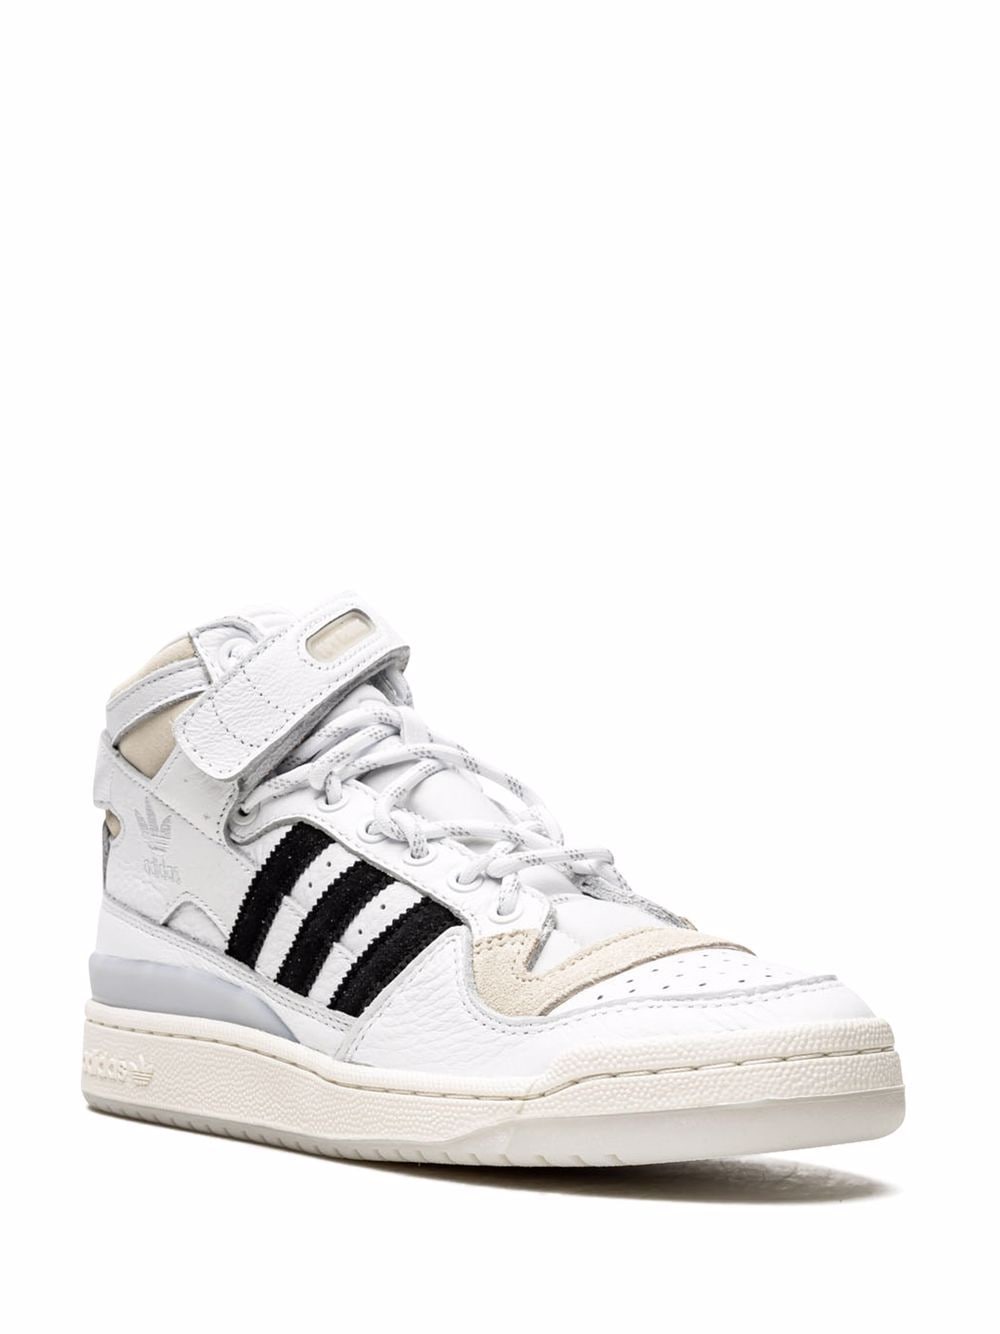 Image 2 of adidas x Ivy Park Forum Mid sneakers